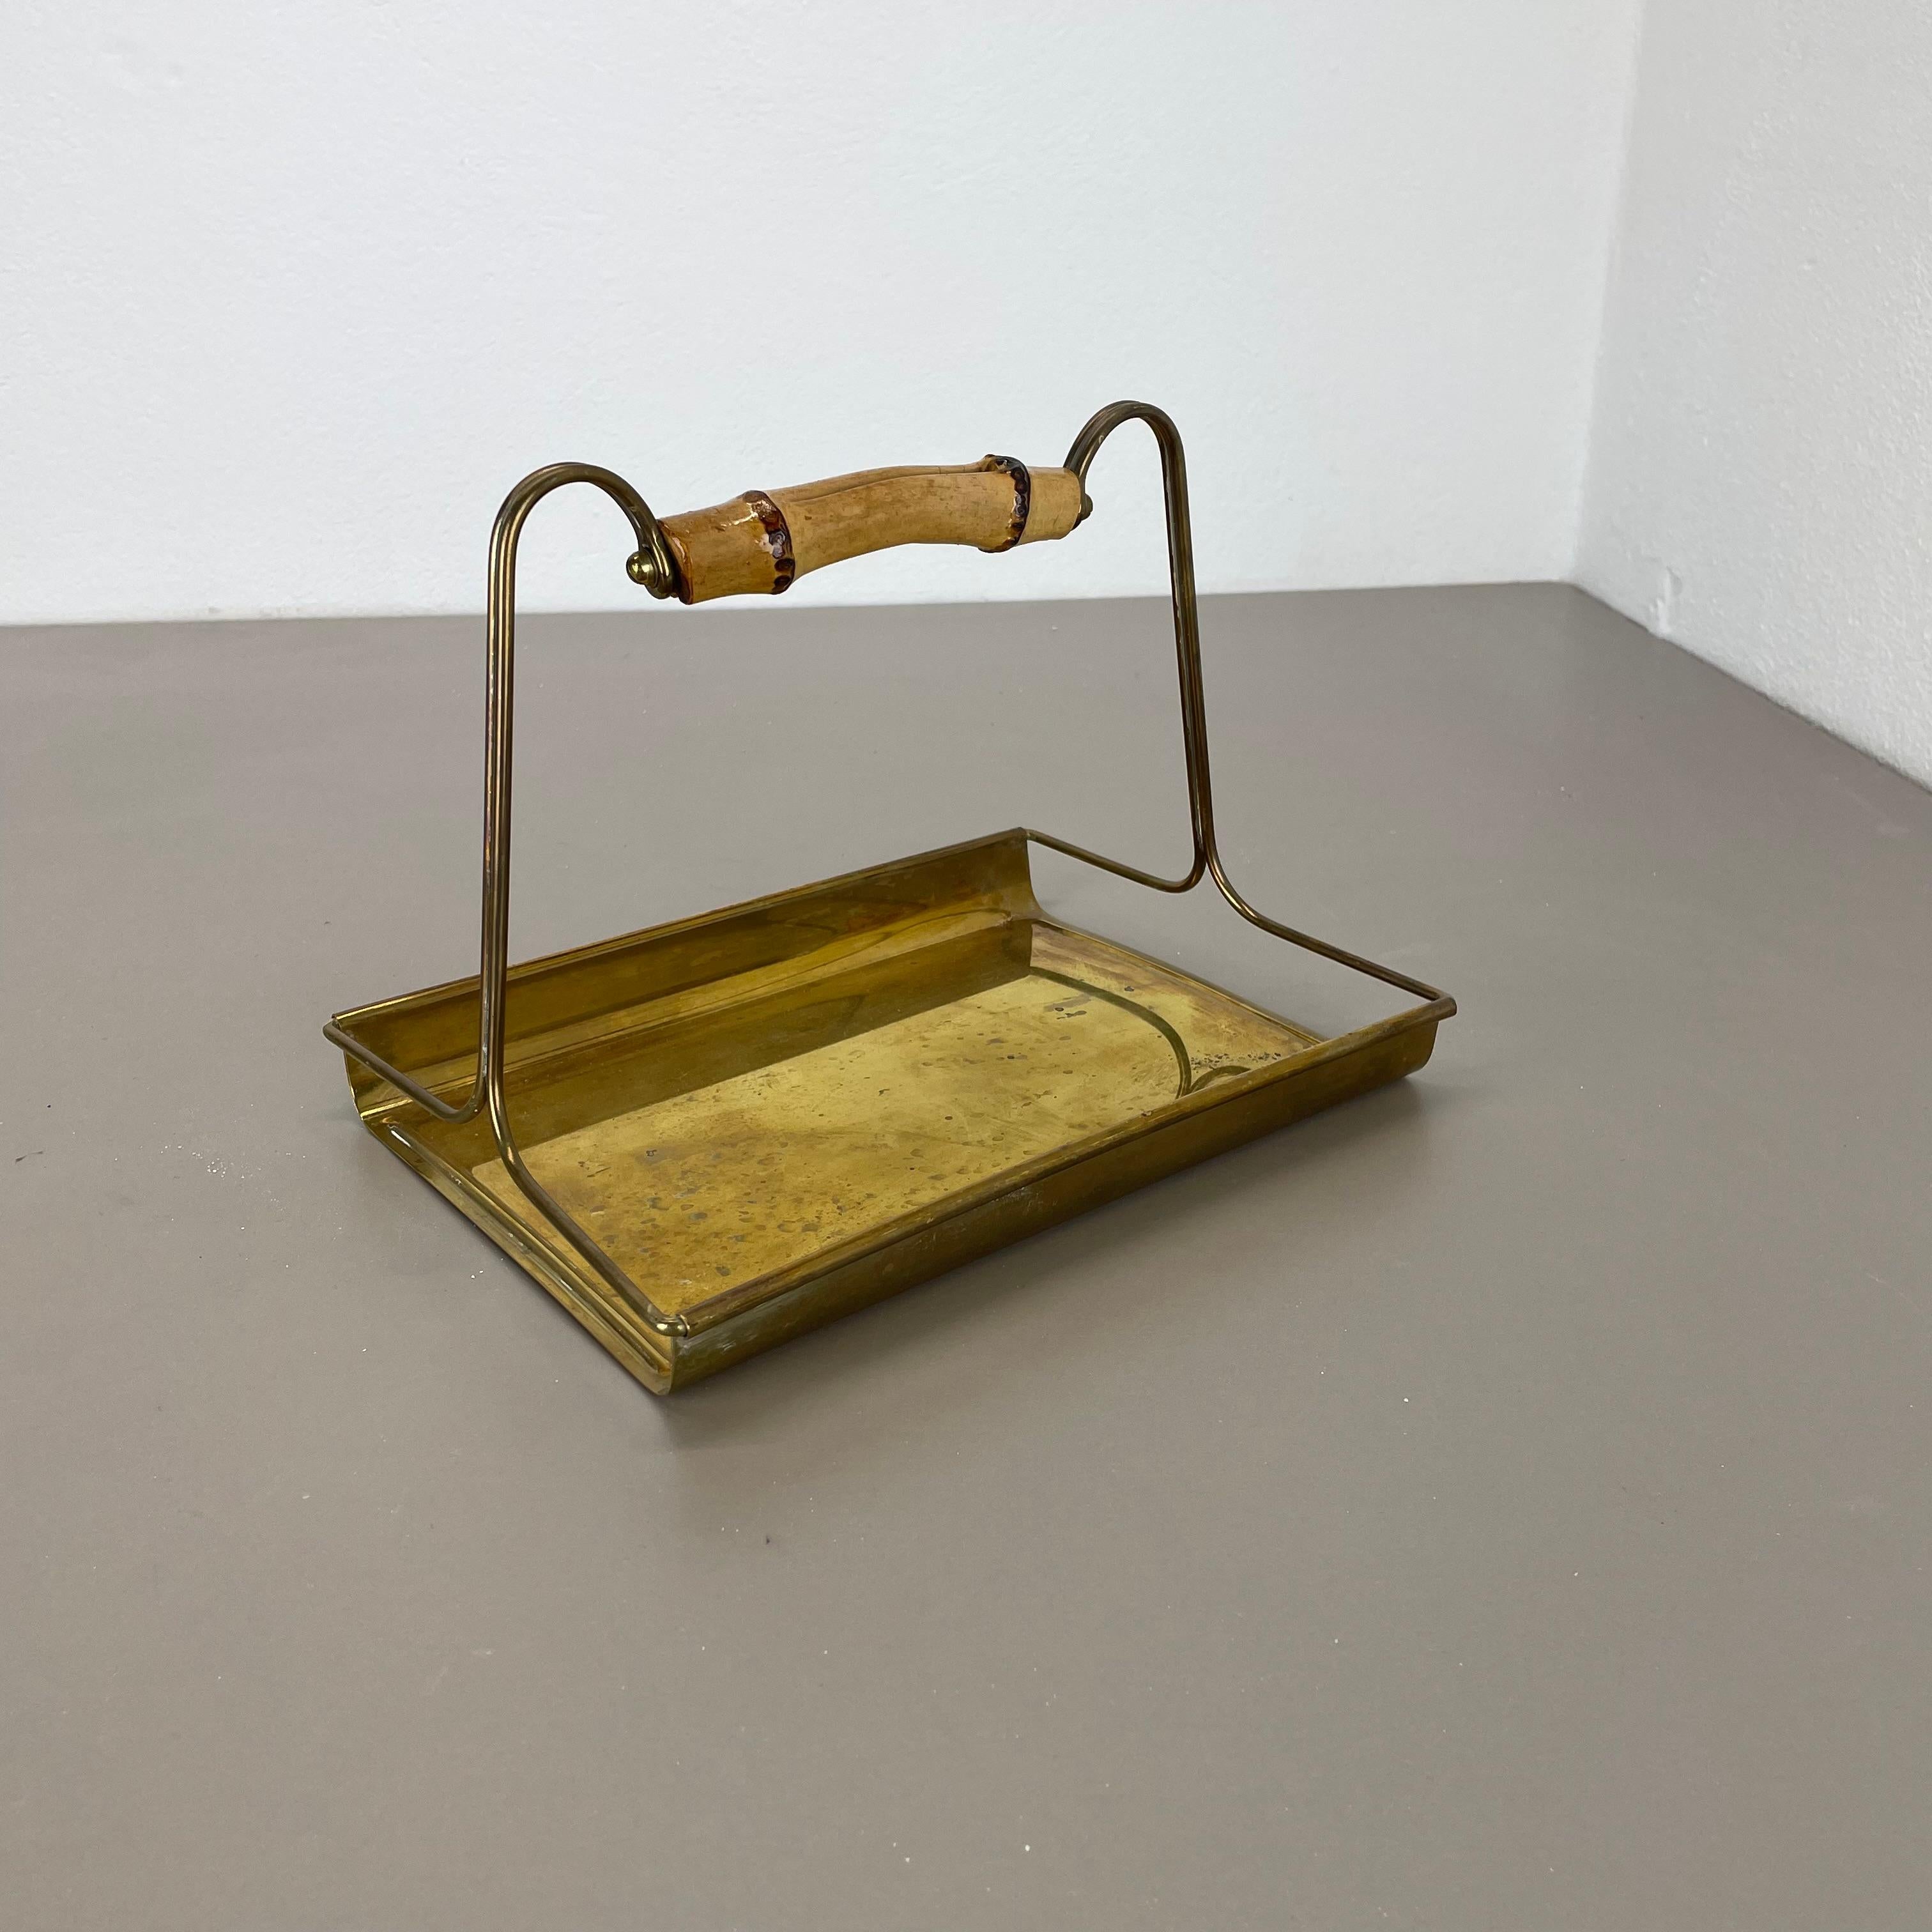 Article:

Tray element with bamboo handle


Producer:

Grasoli, Germany


Origin:

Germany


Material:

Bamboo and brass


Decade:

1950s


Description:

This original midcentury tray element was produced in the 1950s in Germany by Grasoli,